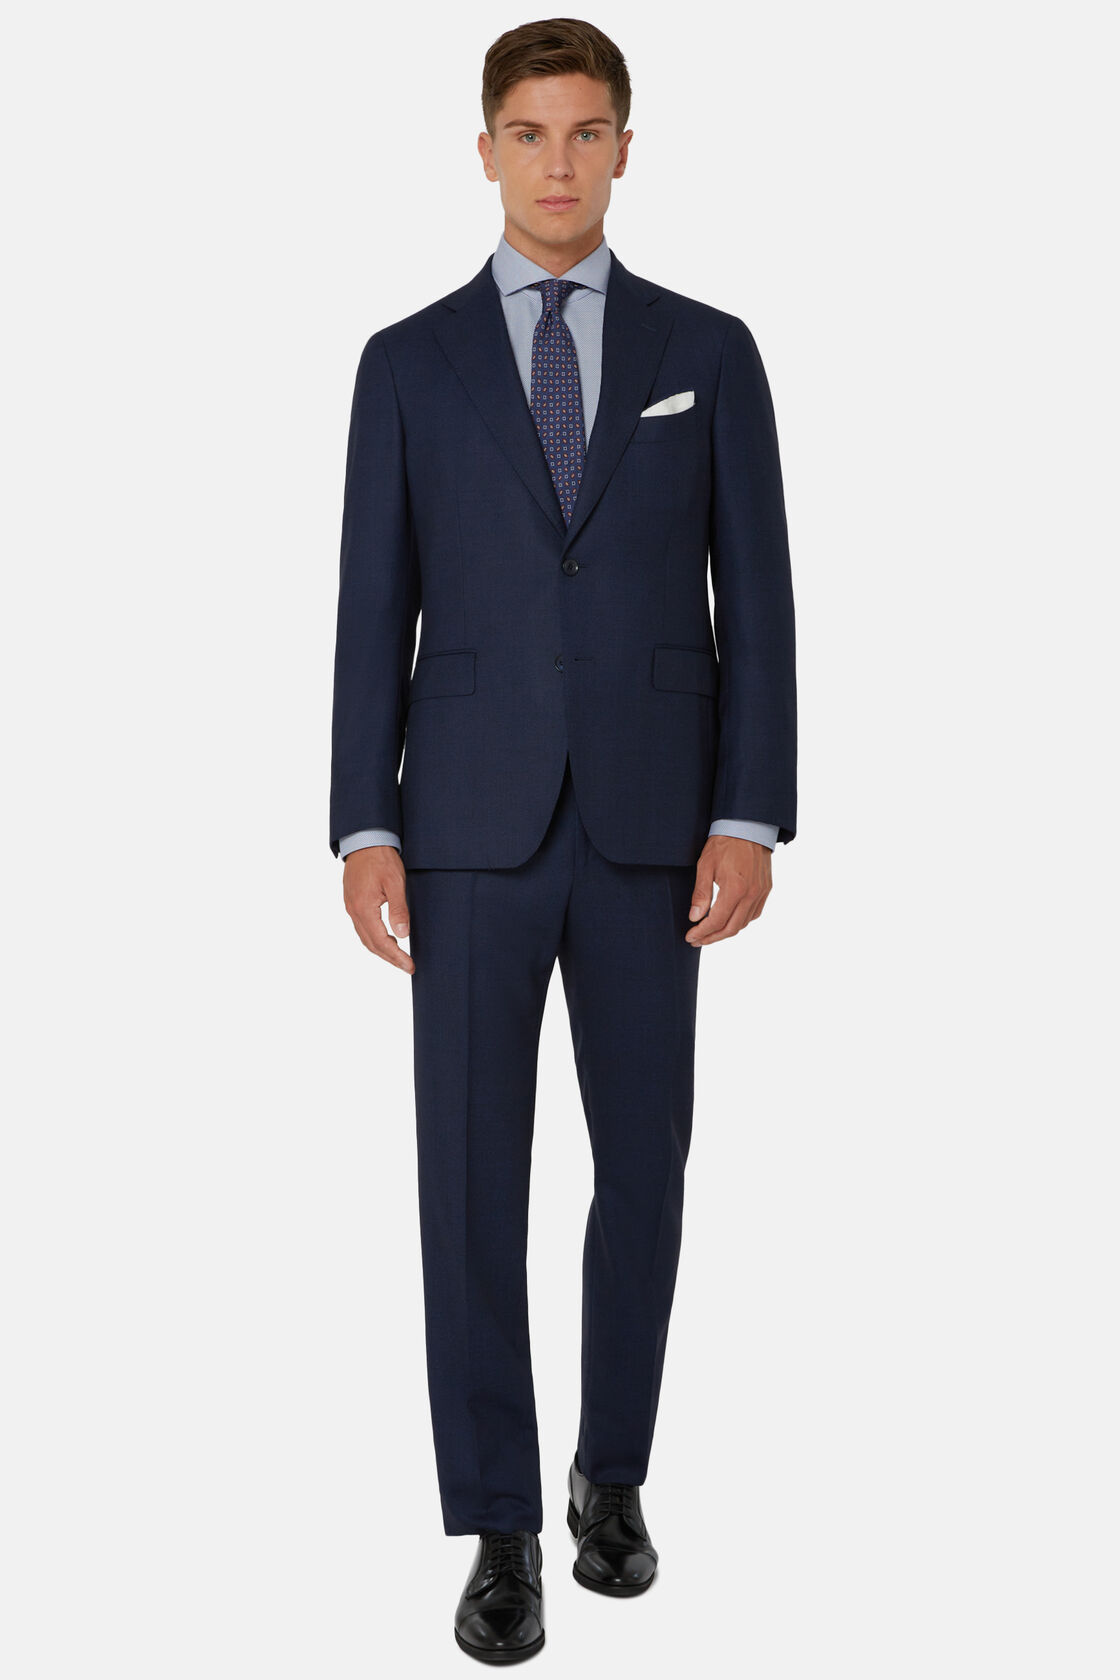 Blue Micro-Textured Suit In Super 130 Wool, Navy blue, hi-res